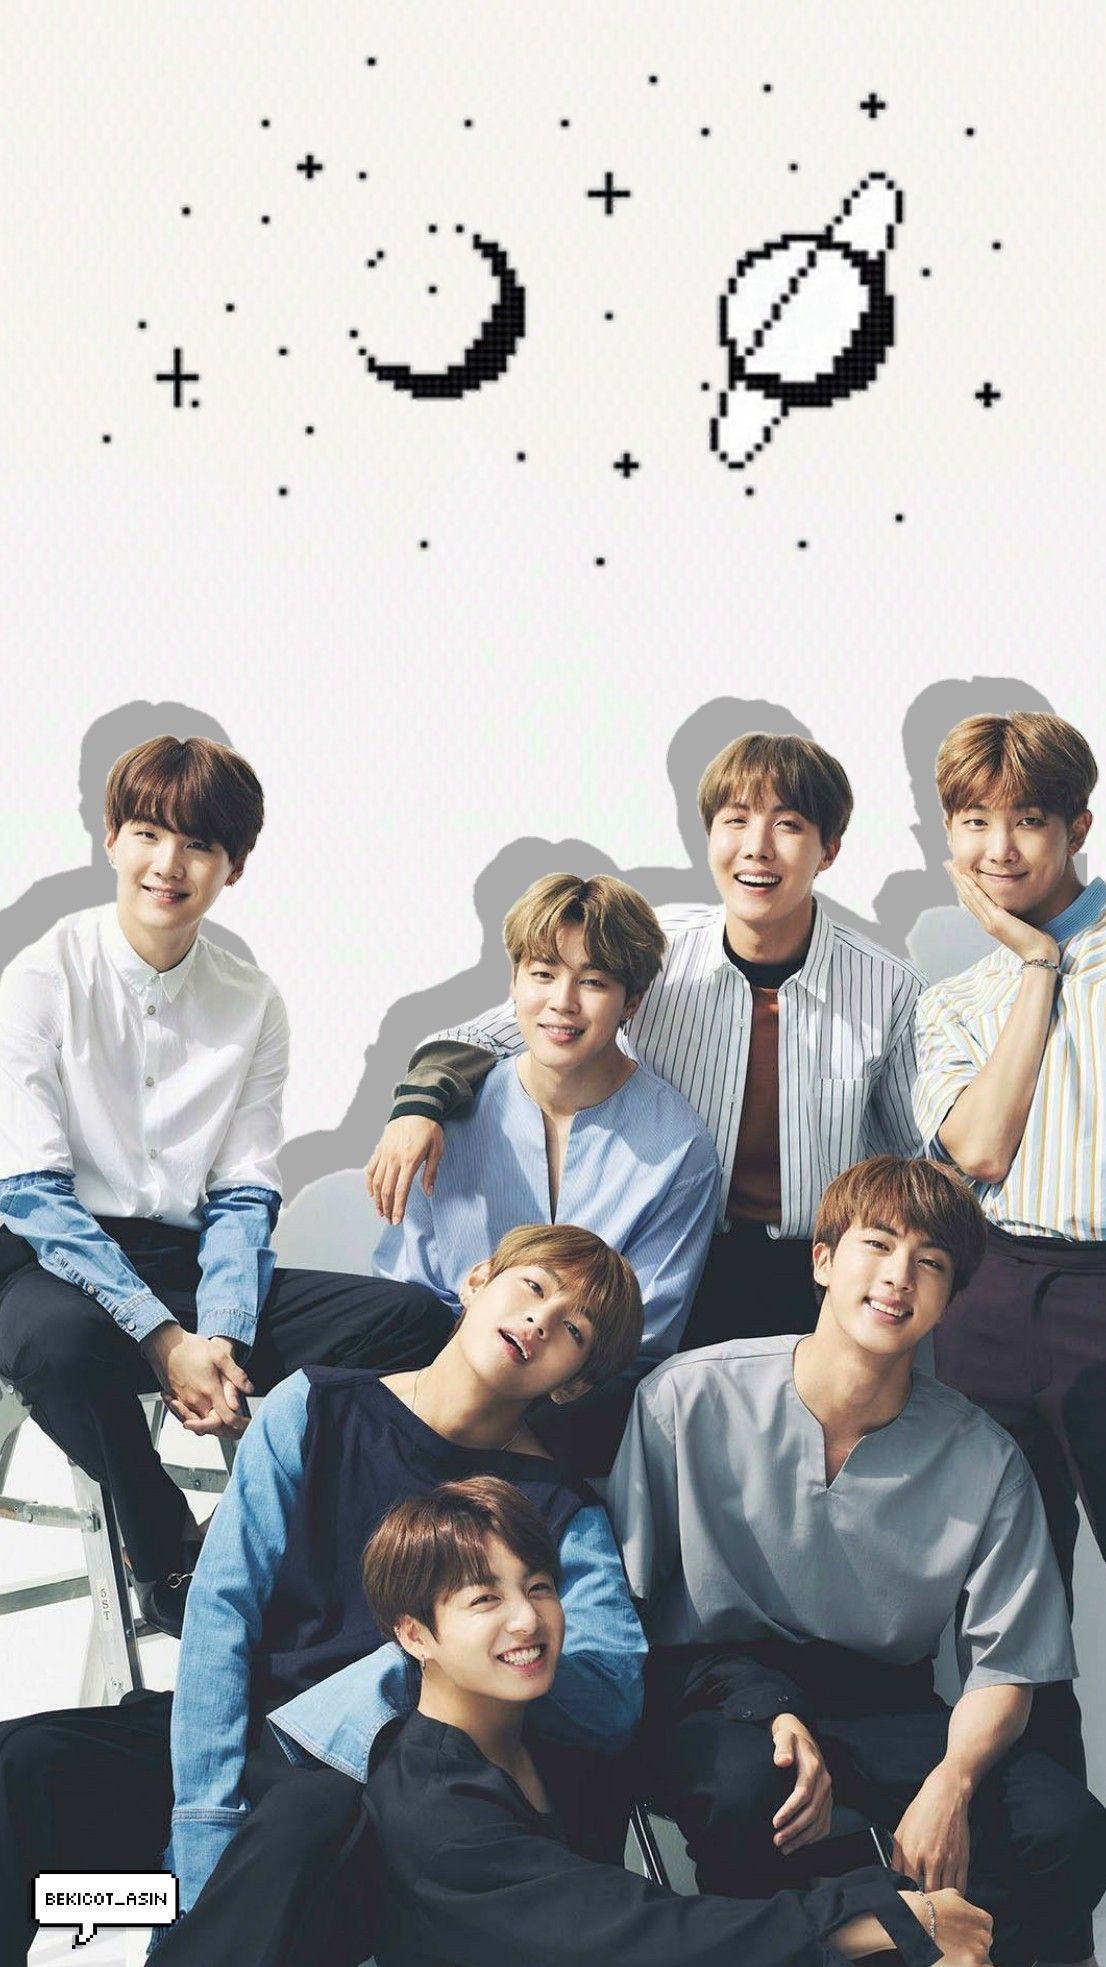 Iphone wallpaper of bts for free download! - BTS, smile